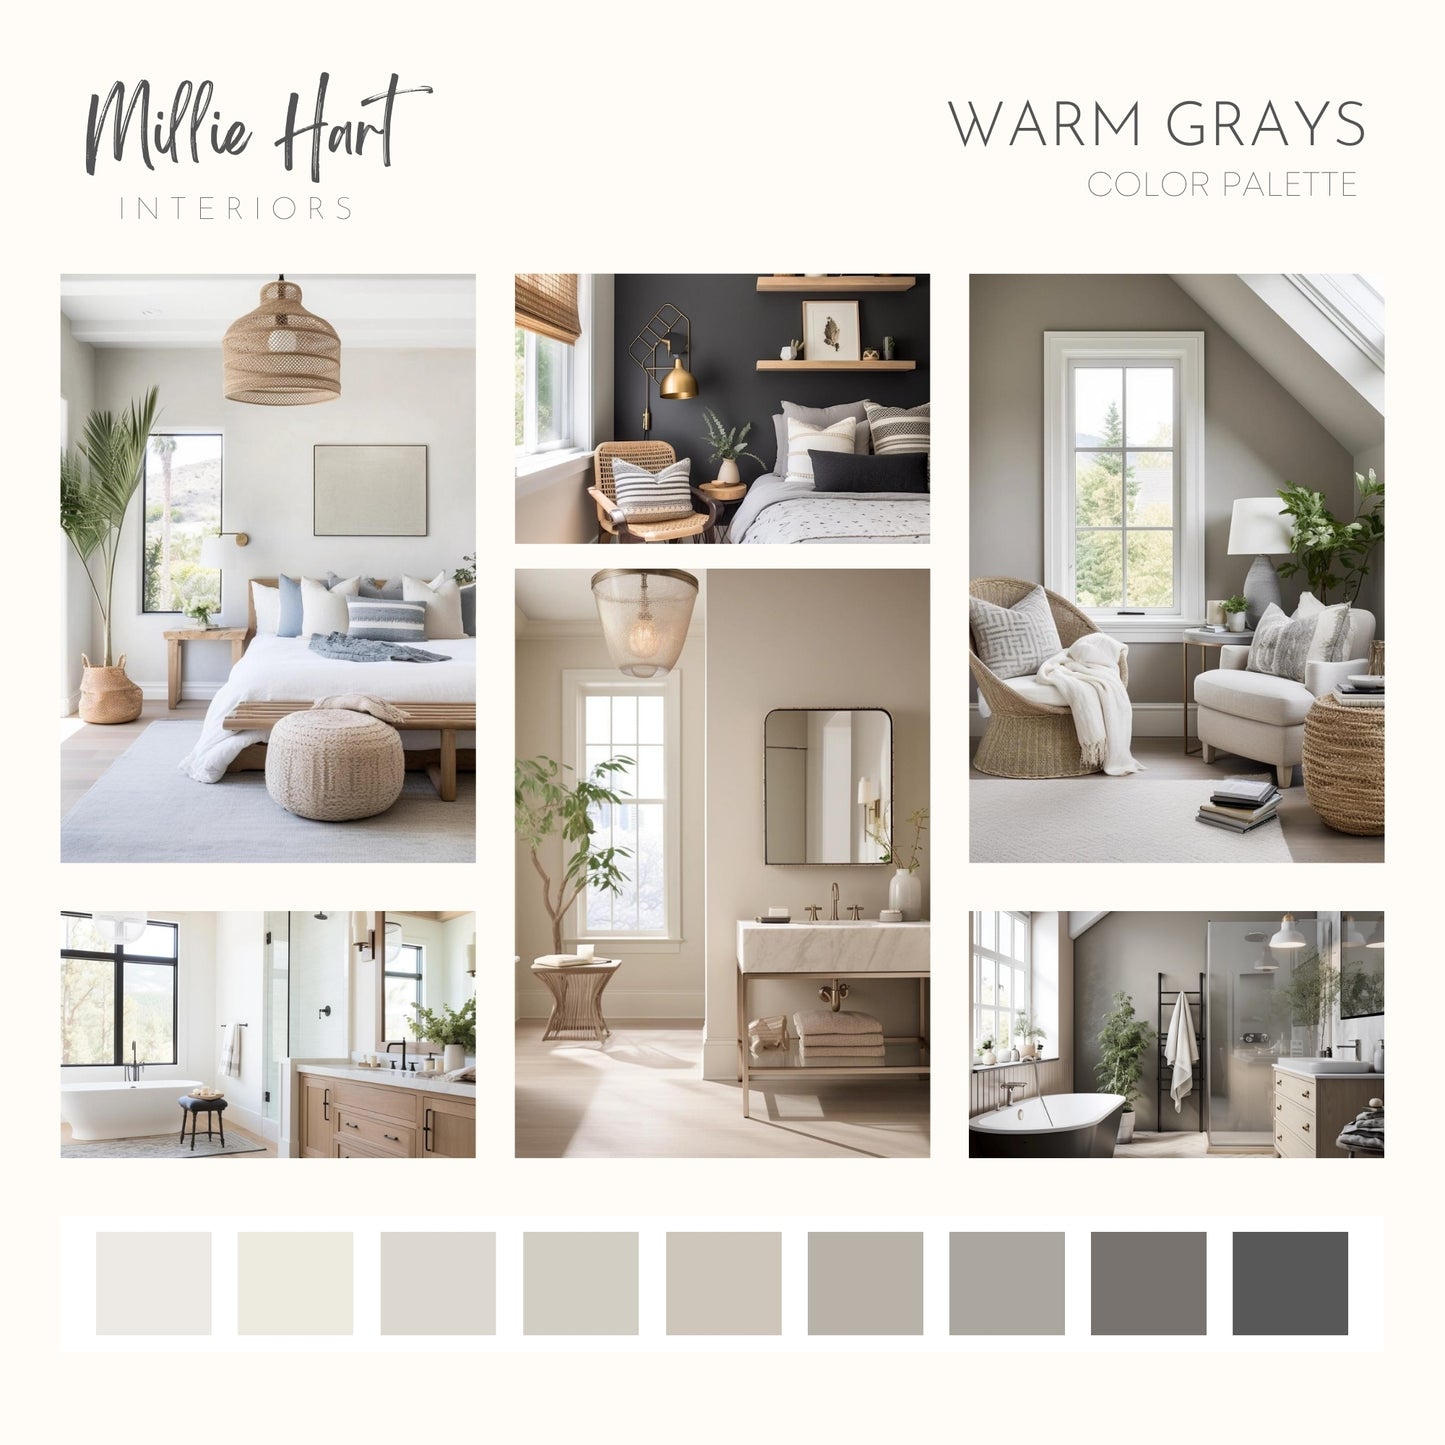 Warm Grays Benjamin Moore Paint Palette - Modern Neutral Interior Paint Colors for Home - Coordinating Interior Design Color Palette, Benjamin Moore Collingwood